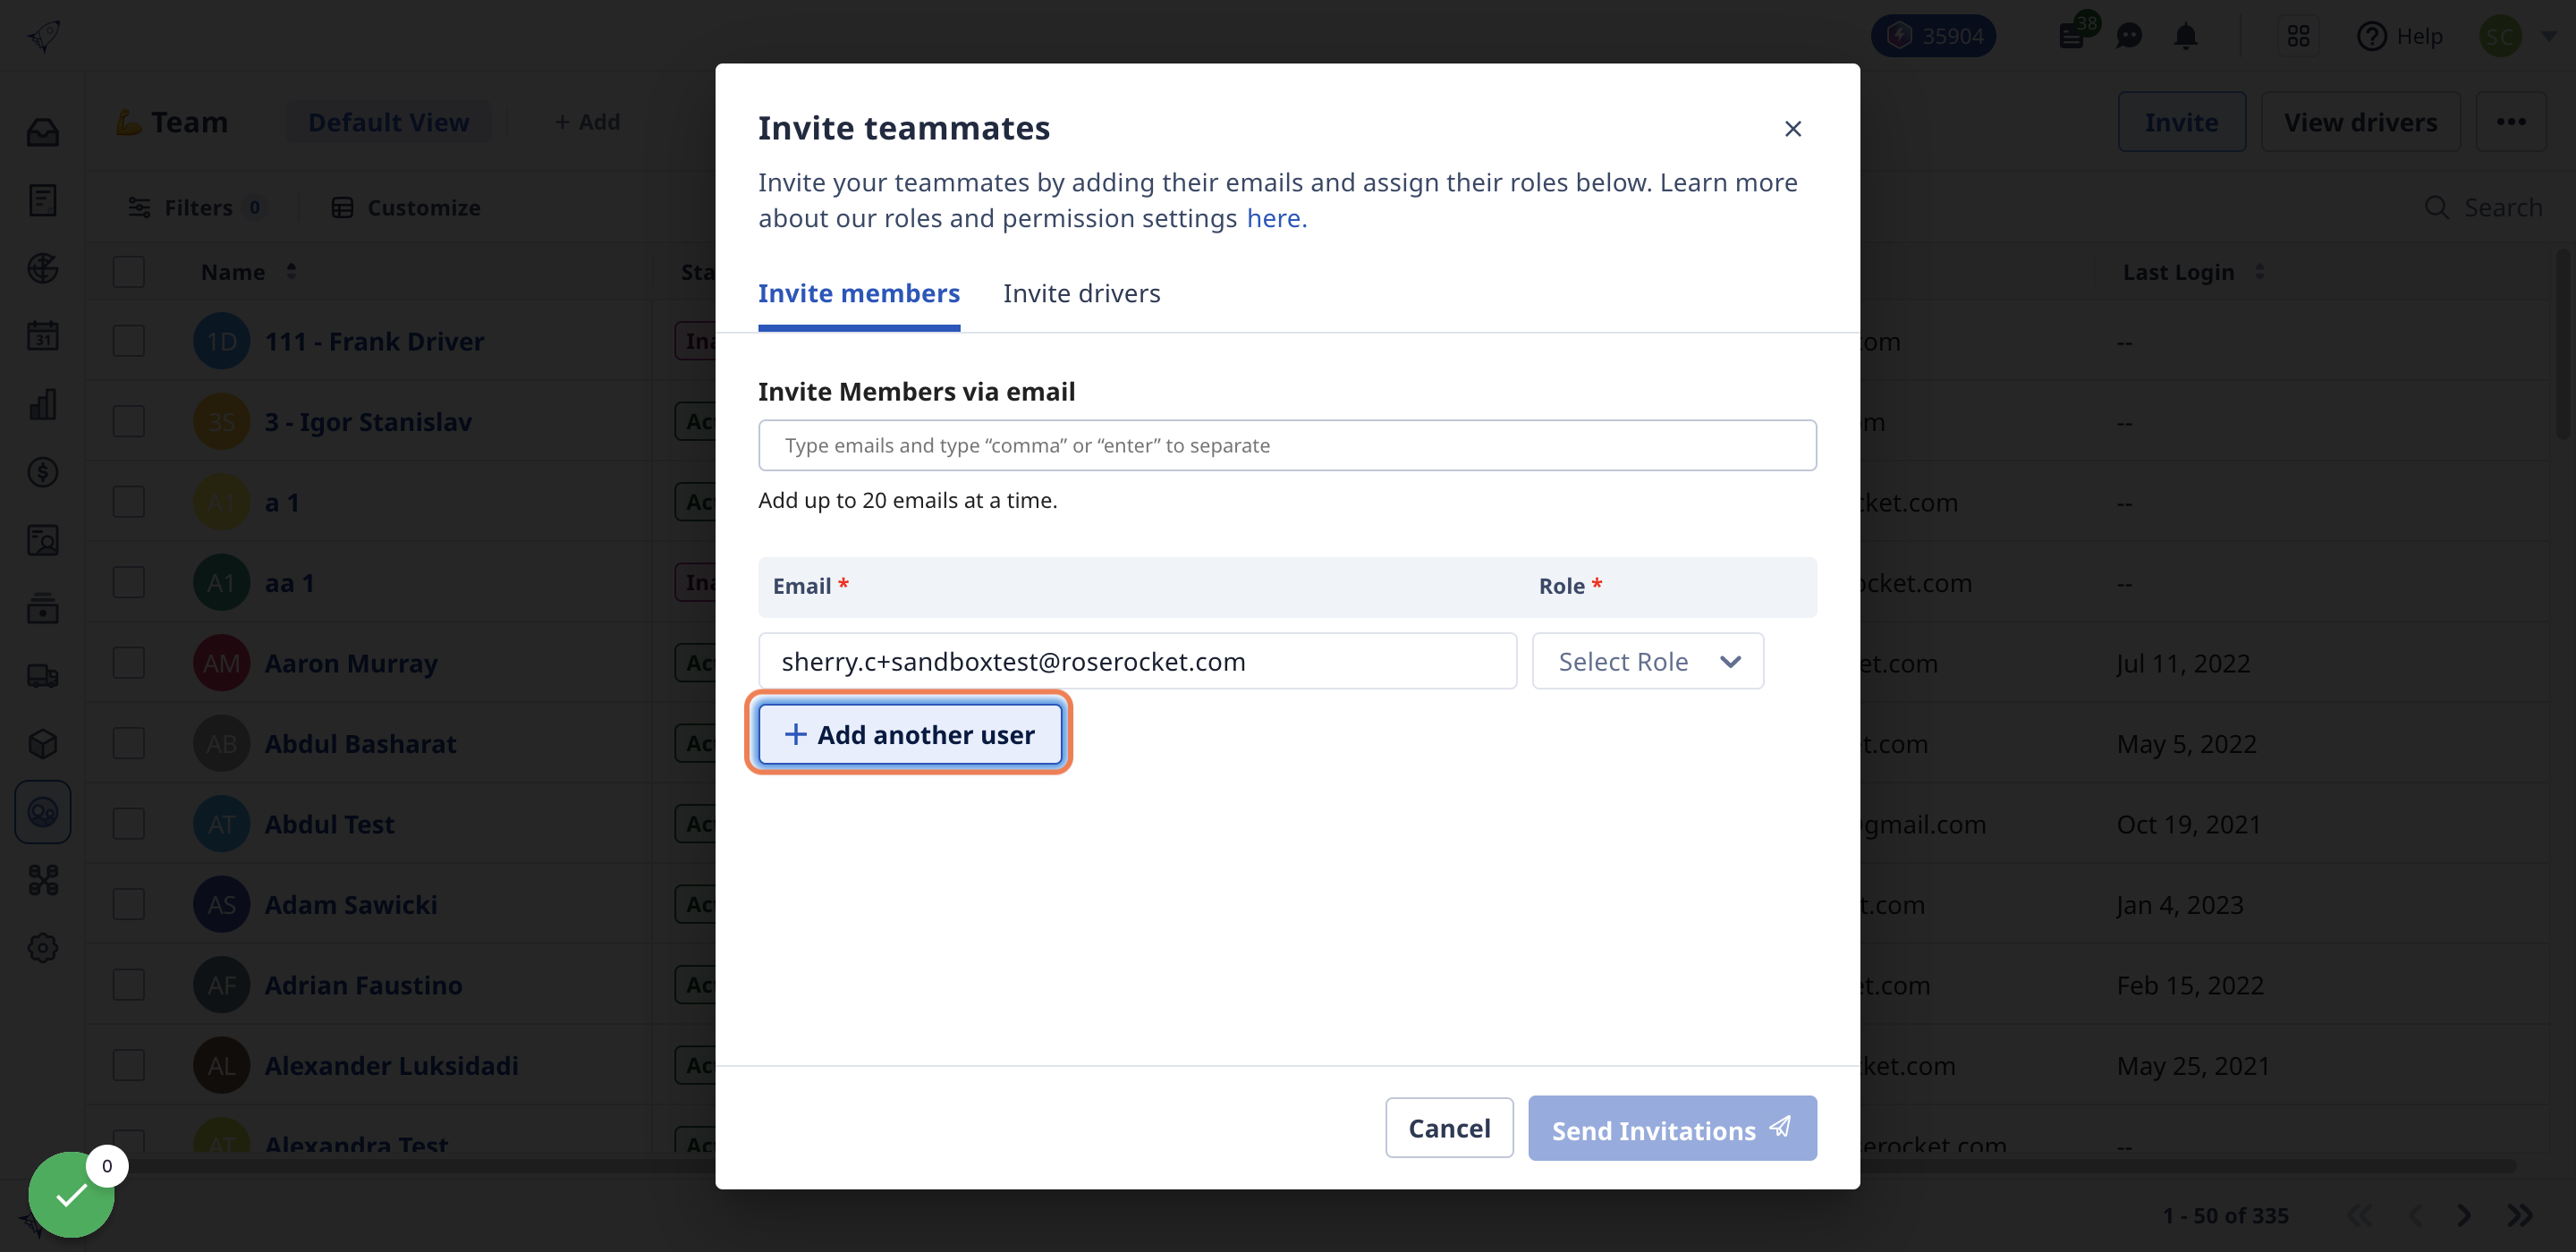 Click on + Add another user to add multiple team members at once.